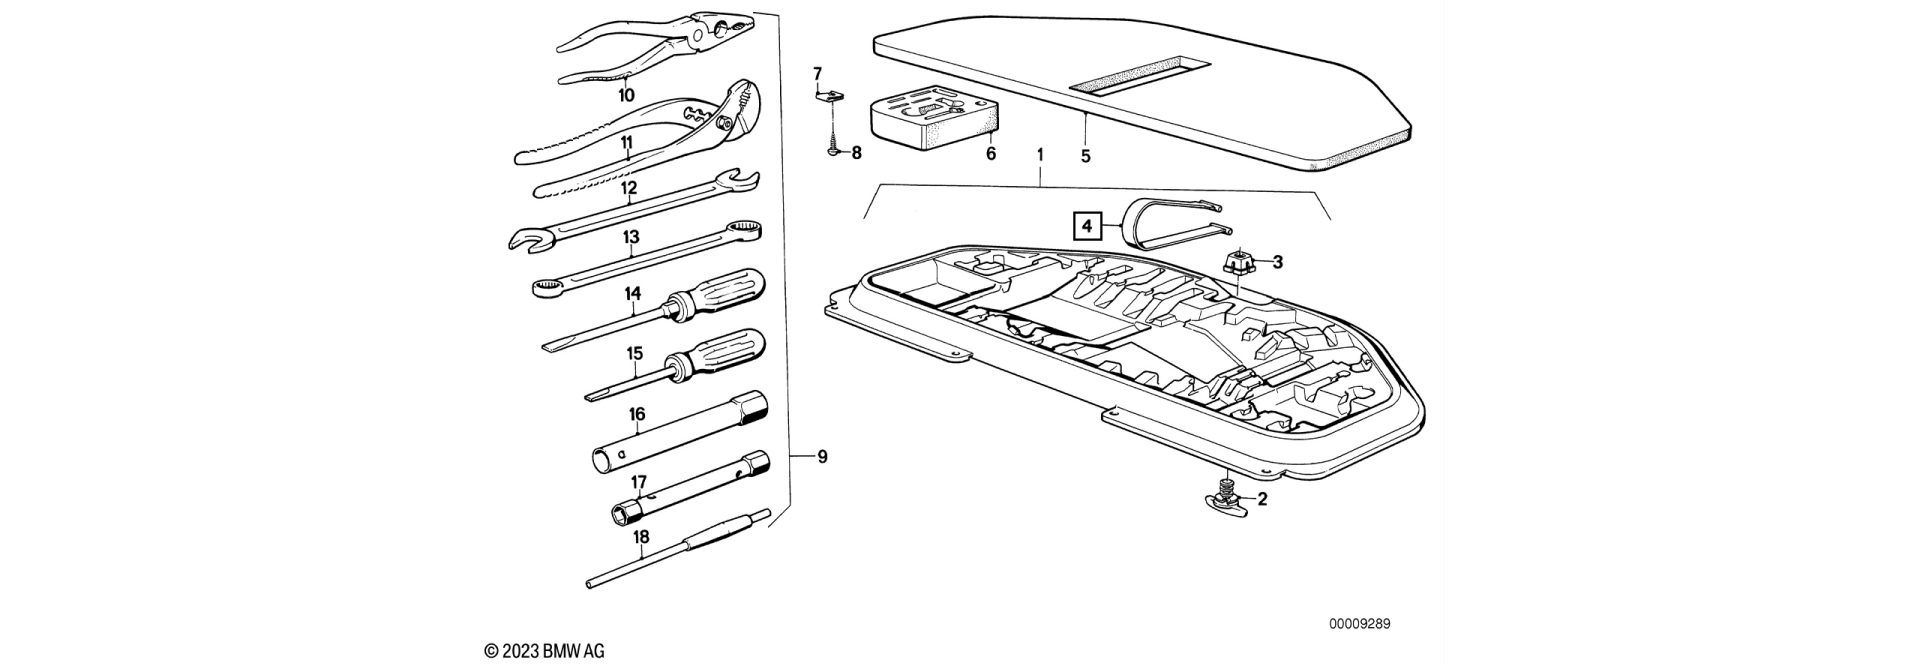 Holding strap exploded-view drawing